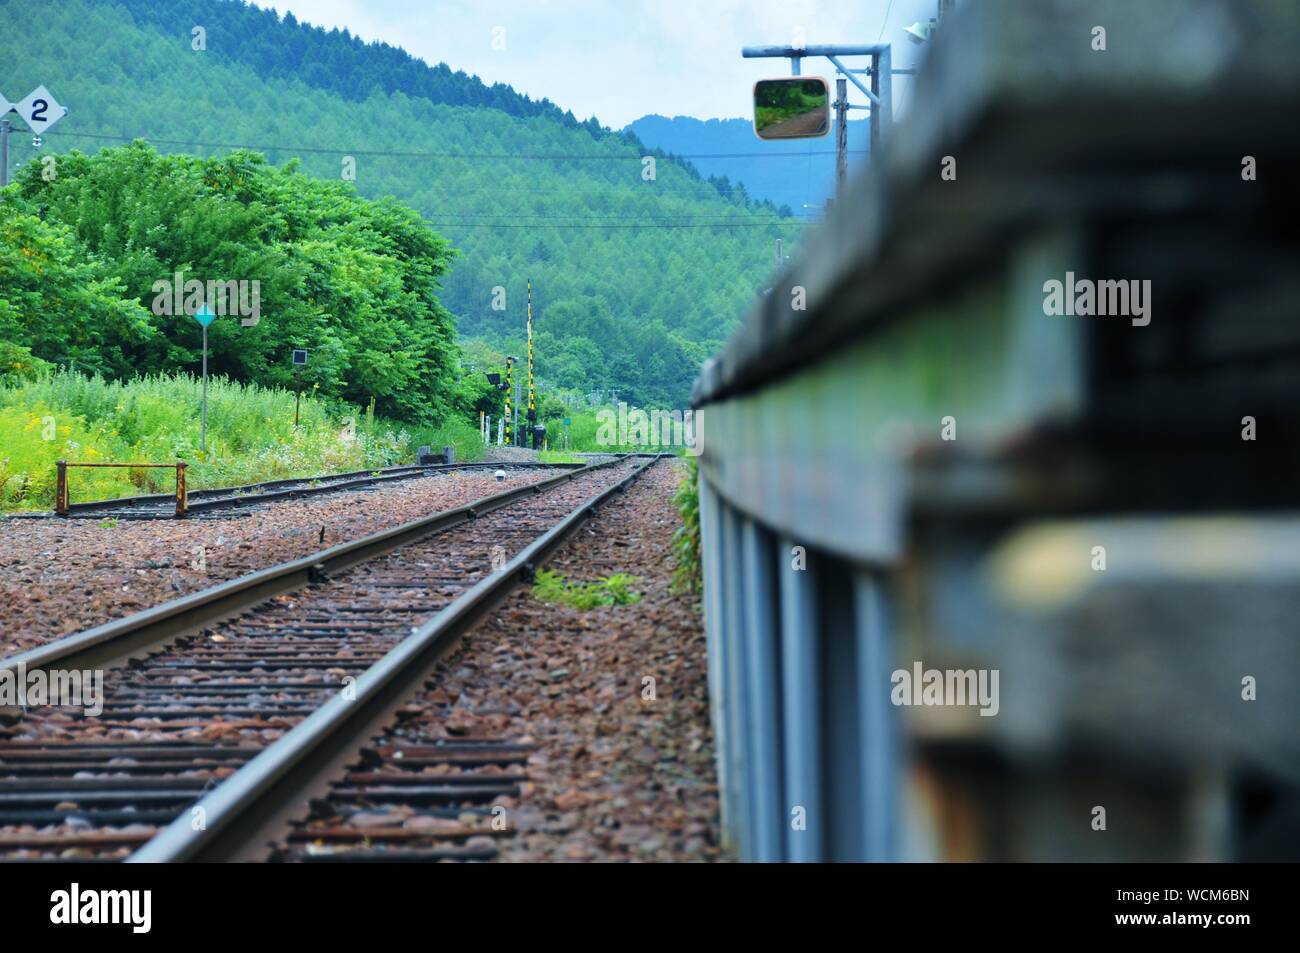 View Of Rail Road Track Stock Photo